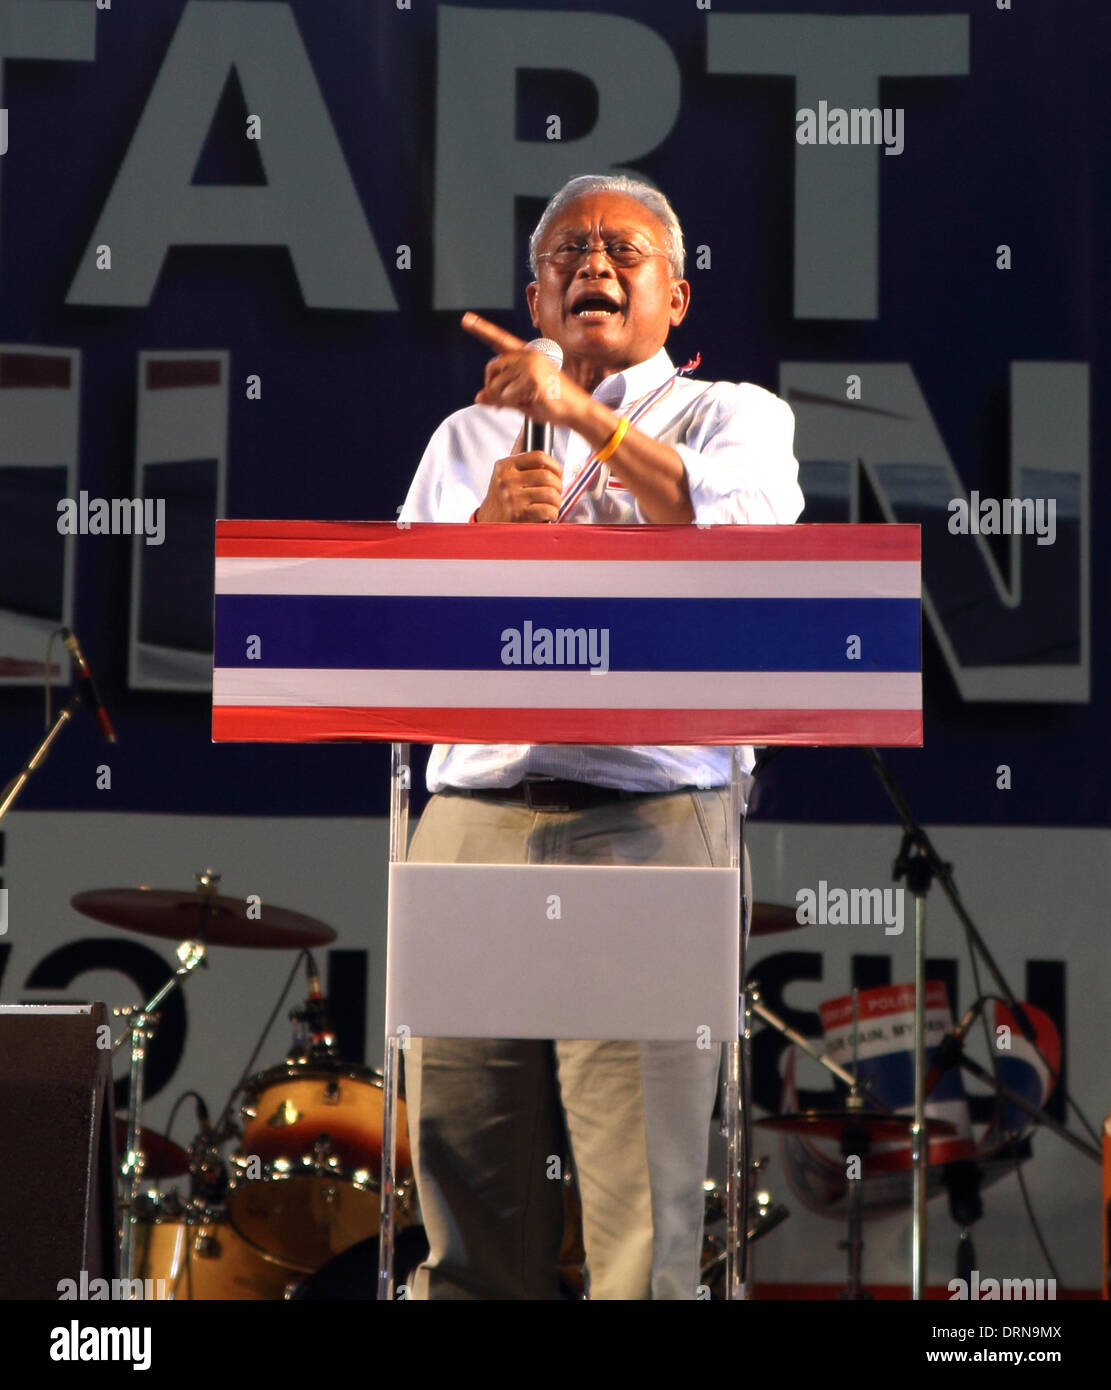 Bangkok, Thailand. 29 January 2014.  Anti- government leader Suthep Thaugsuban speaks to his supporters on stage. Thailand's government announced Tuesday it will go ahead with an election this weekend despite an opposition boycott, months of street protests and the likelihood of more violence in the country's political crisis. Credit:  John Vincent/Alamy Live News Stock Photo